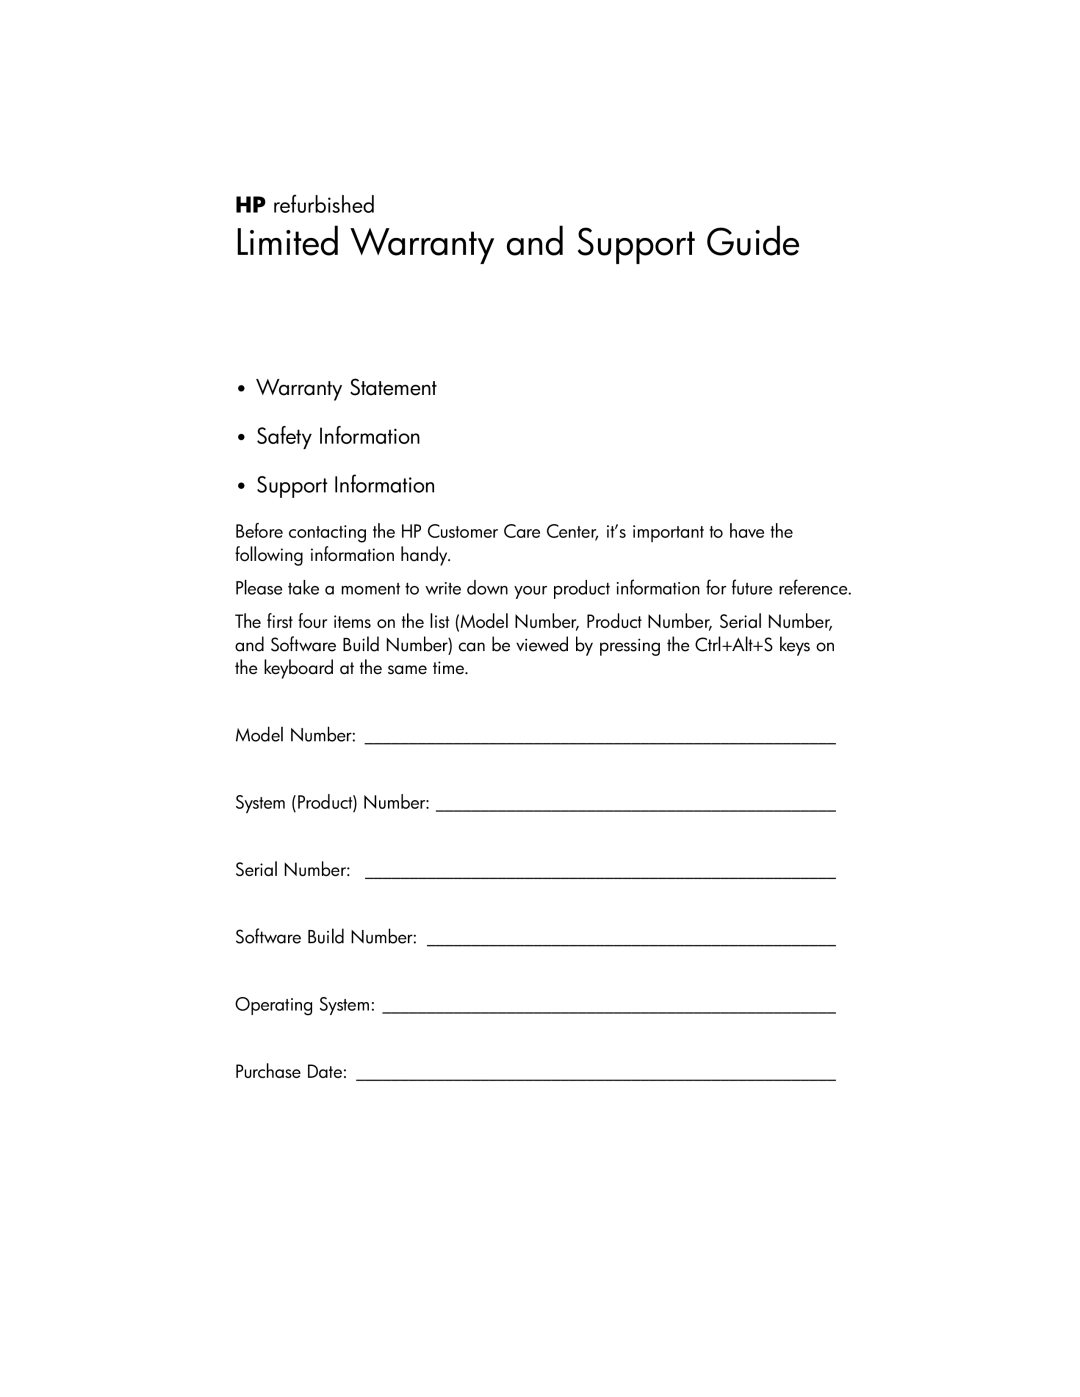 HP 100-5157 Limited Warranty and Support Guide, HP refurbished, Warranty Statement Safety Information Support Information 